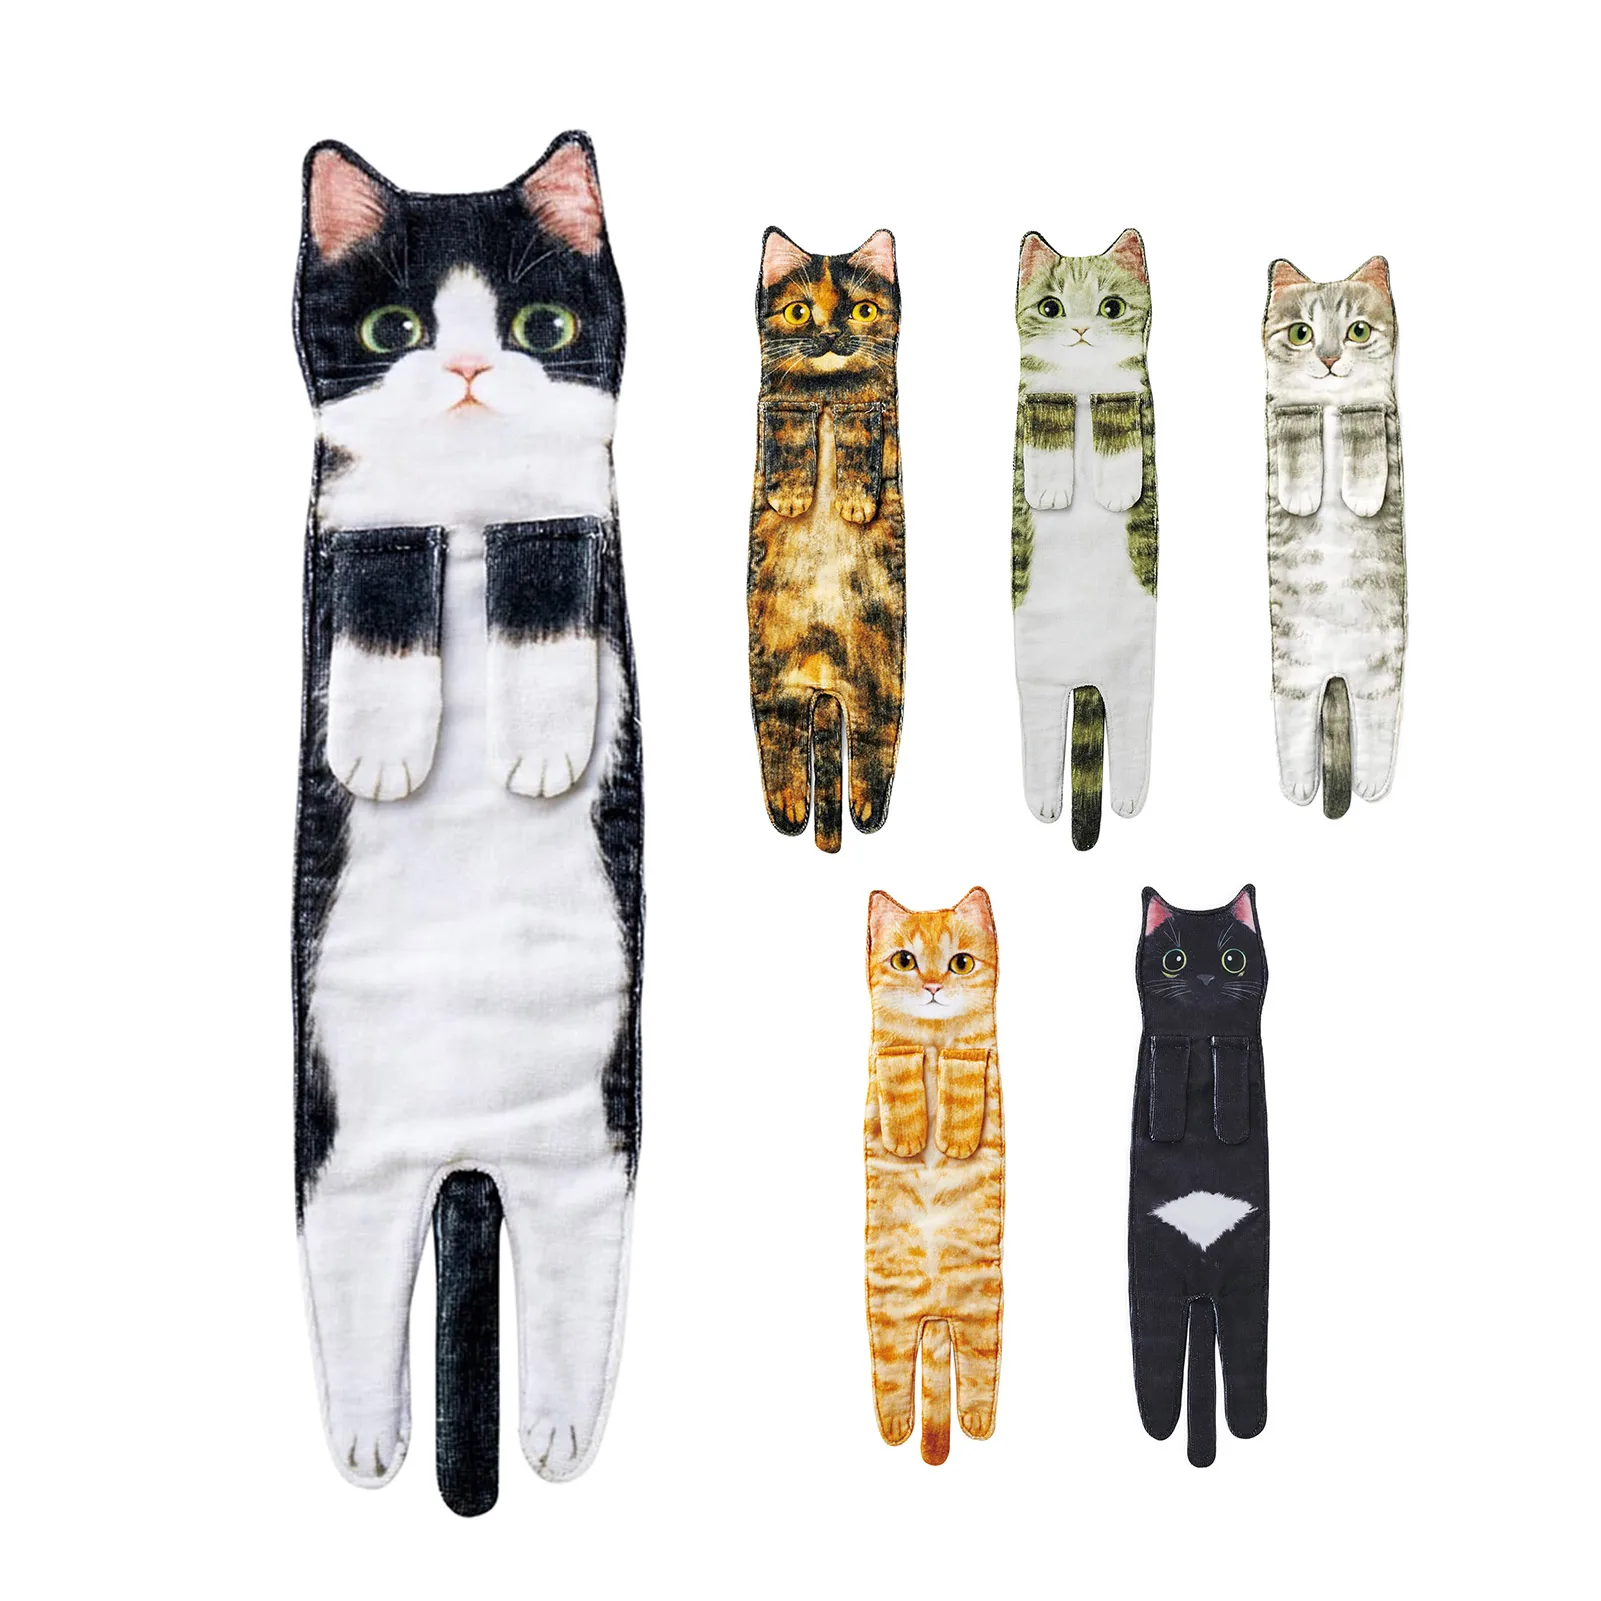 

NEW Funny Cat Hand Towels Cats Decor Kitchen Hangings Towels Cat Shape Wipe Hands Towel Cute Decorative Cat Gifts For Cat Lovers